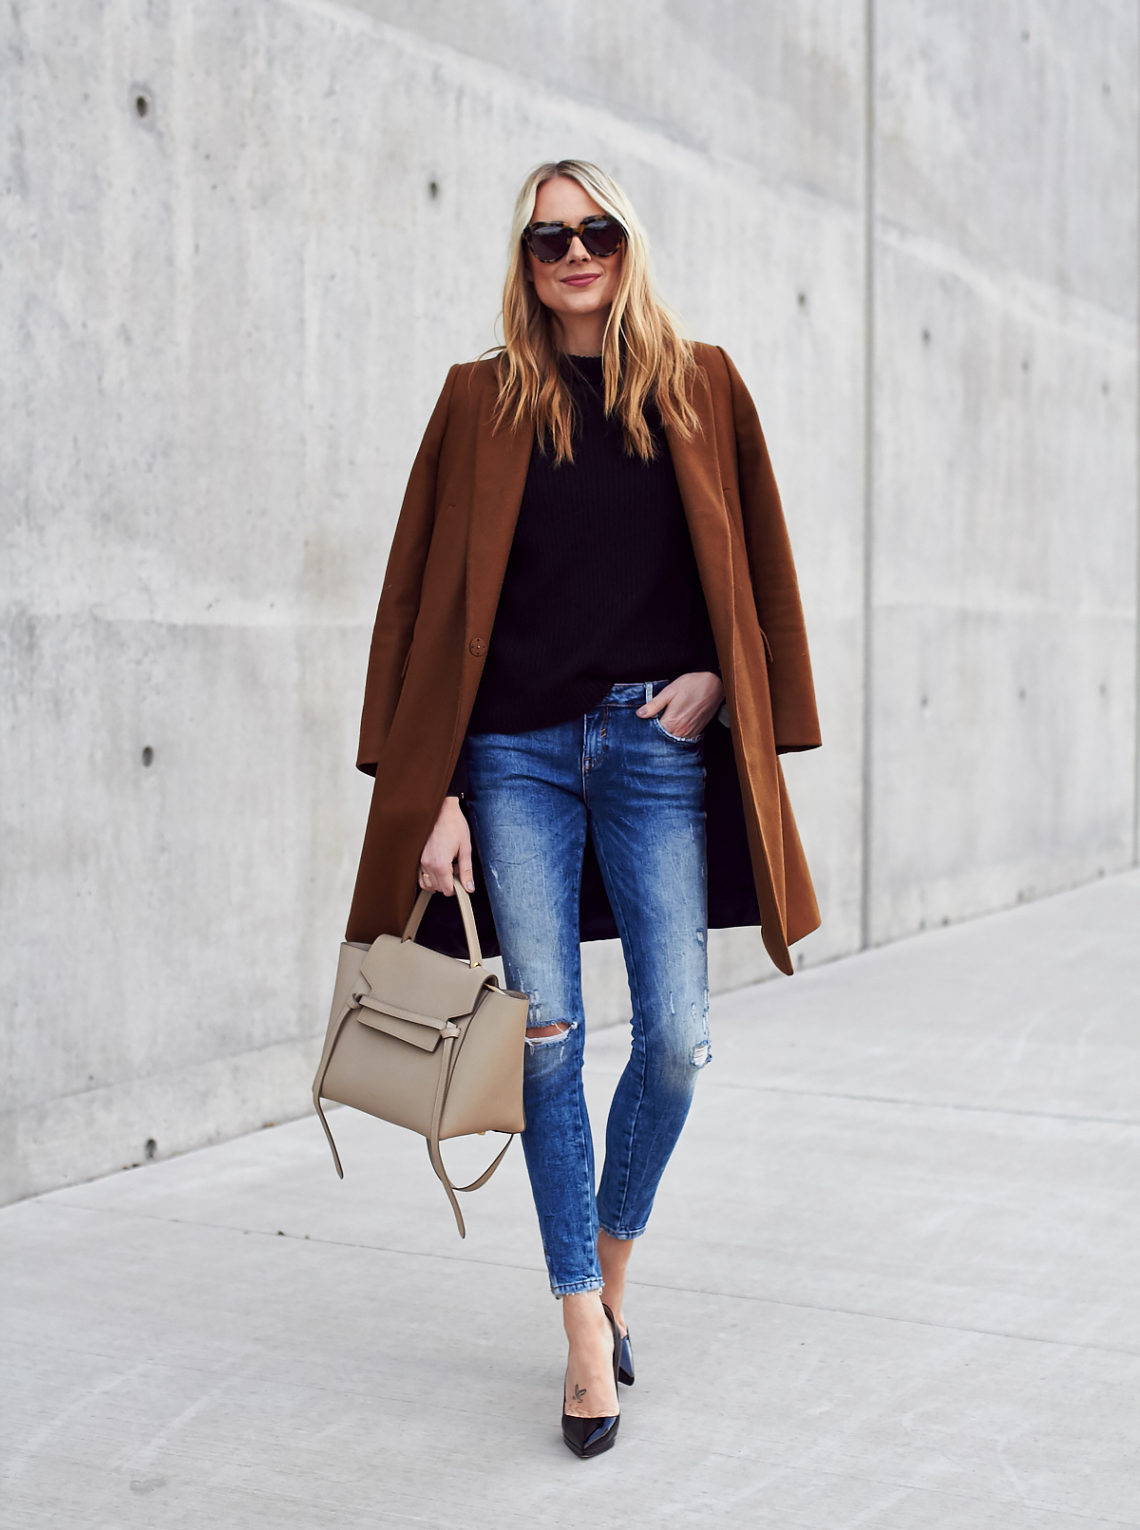 Fall Outfit, Winter Outfit, Tan Topcoat, Black Sweater, Denim Ripped Skinny Jeans, Celine Tie Belt Bag, Black Louboutin Pumps